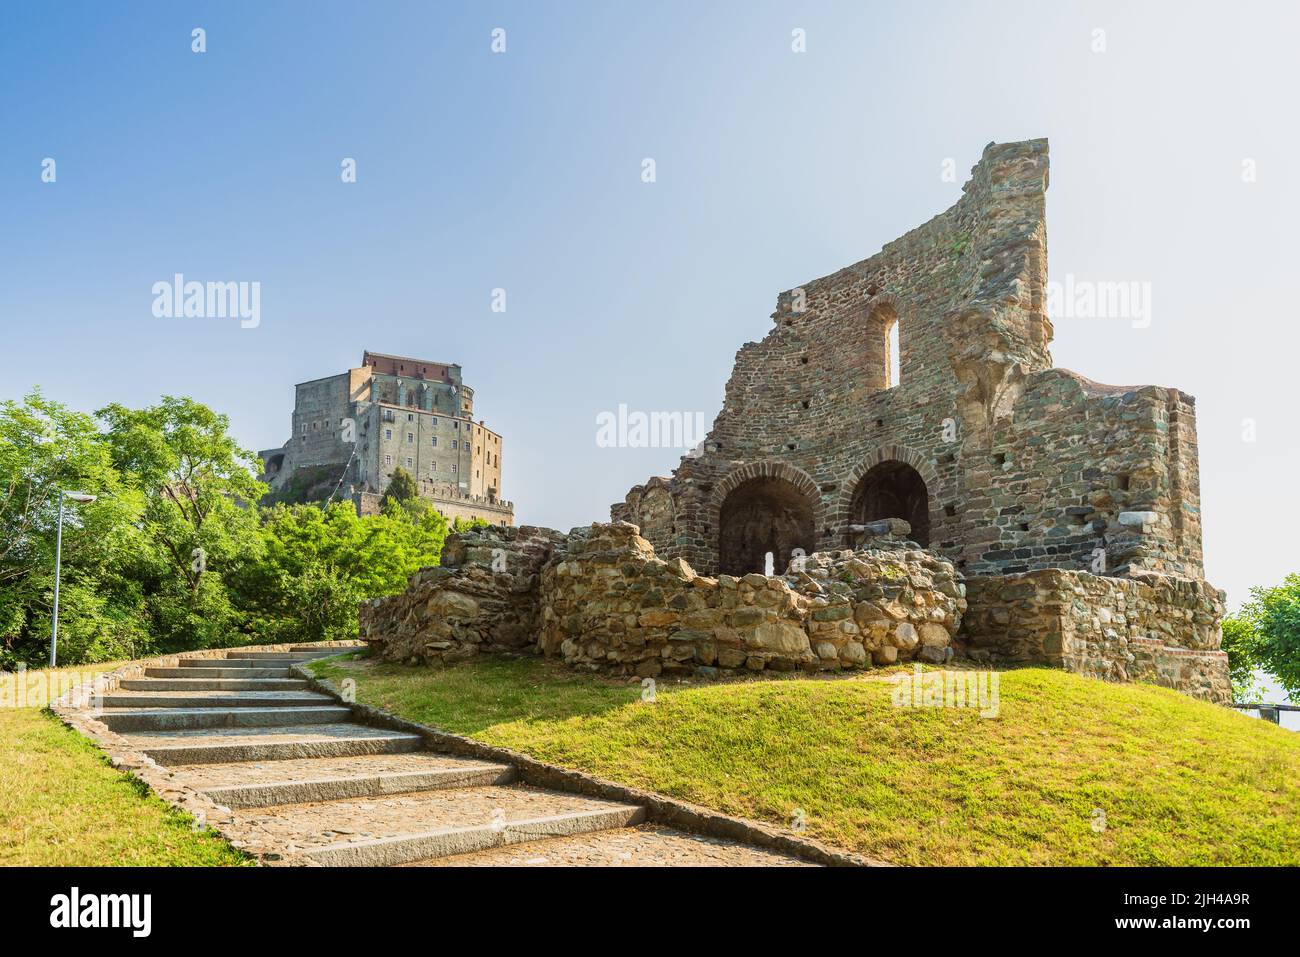 Ruins of Sepolcro dei Monaci on the way to Sacra di San Michele, medieval abbey on top of a hill Stock Photo